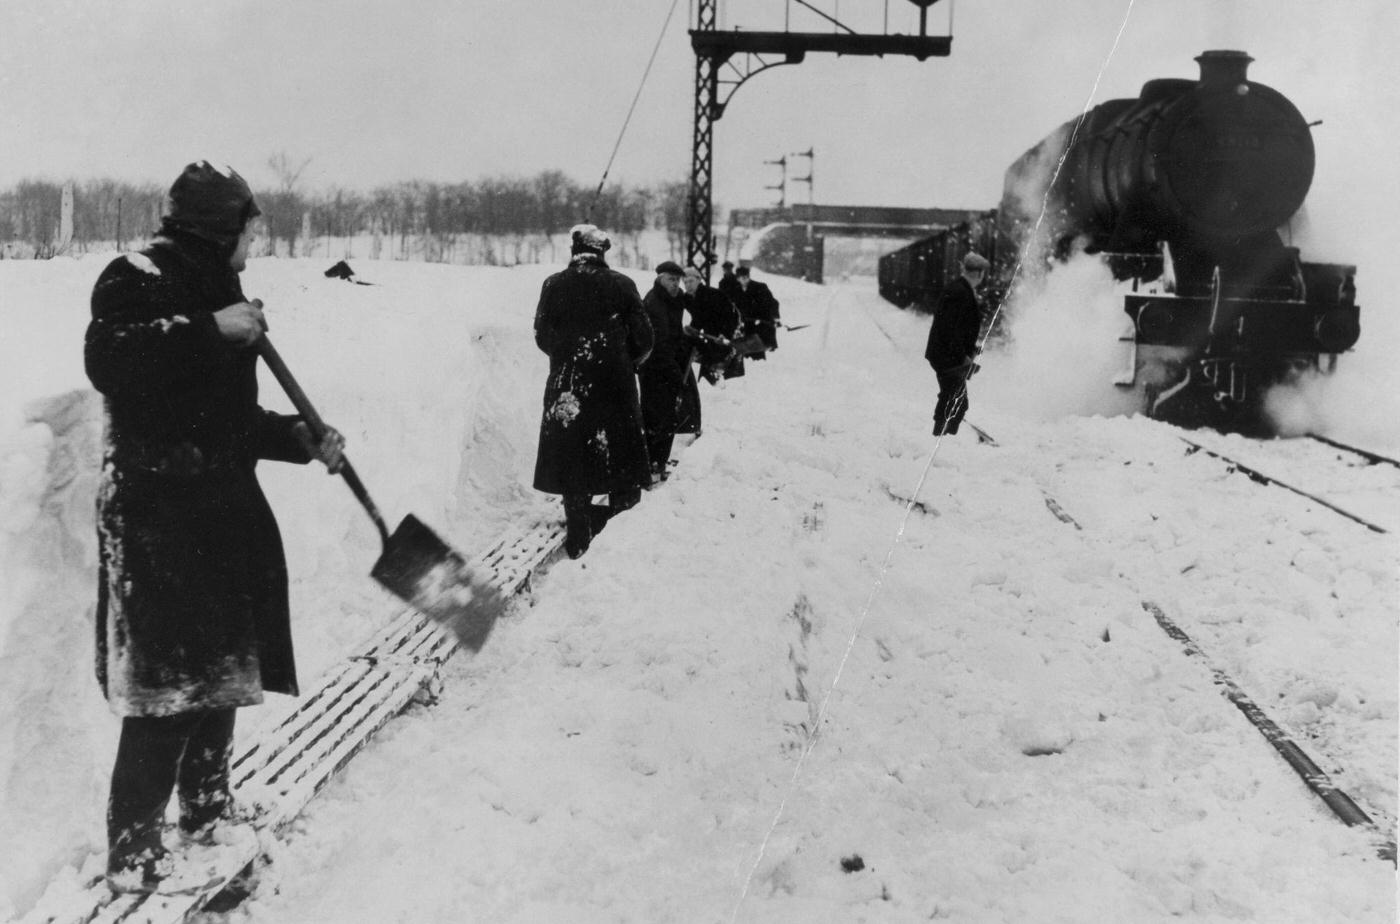 Men at work on the railway line near Kingsthorpe Mill, clearing snow from the lines